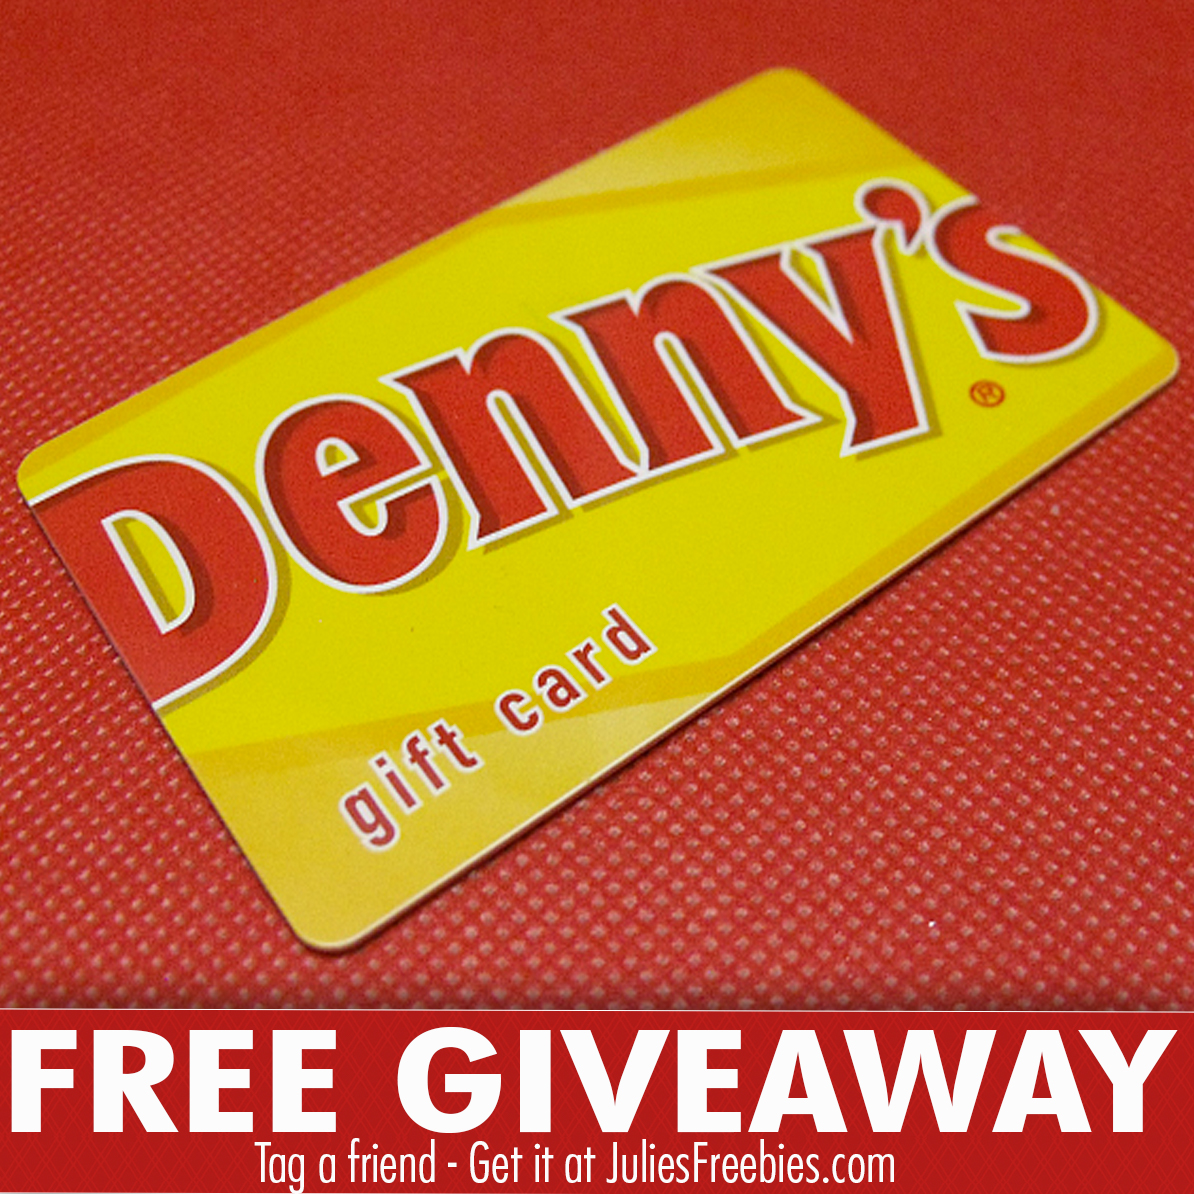 Here Is An Offer Where You Can Enter To Win A 25 00 Denny S Gift Card Simply Follow The Instructions On Post Ends June 5 2018